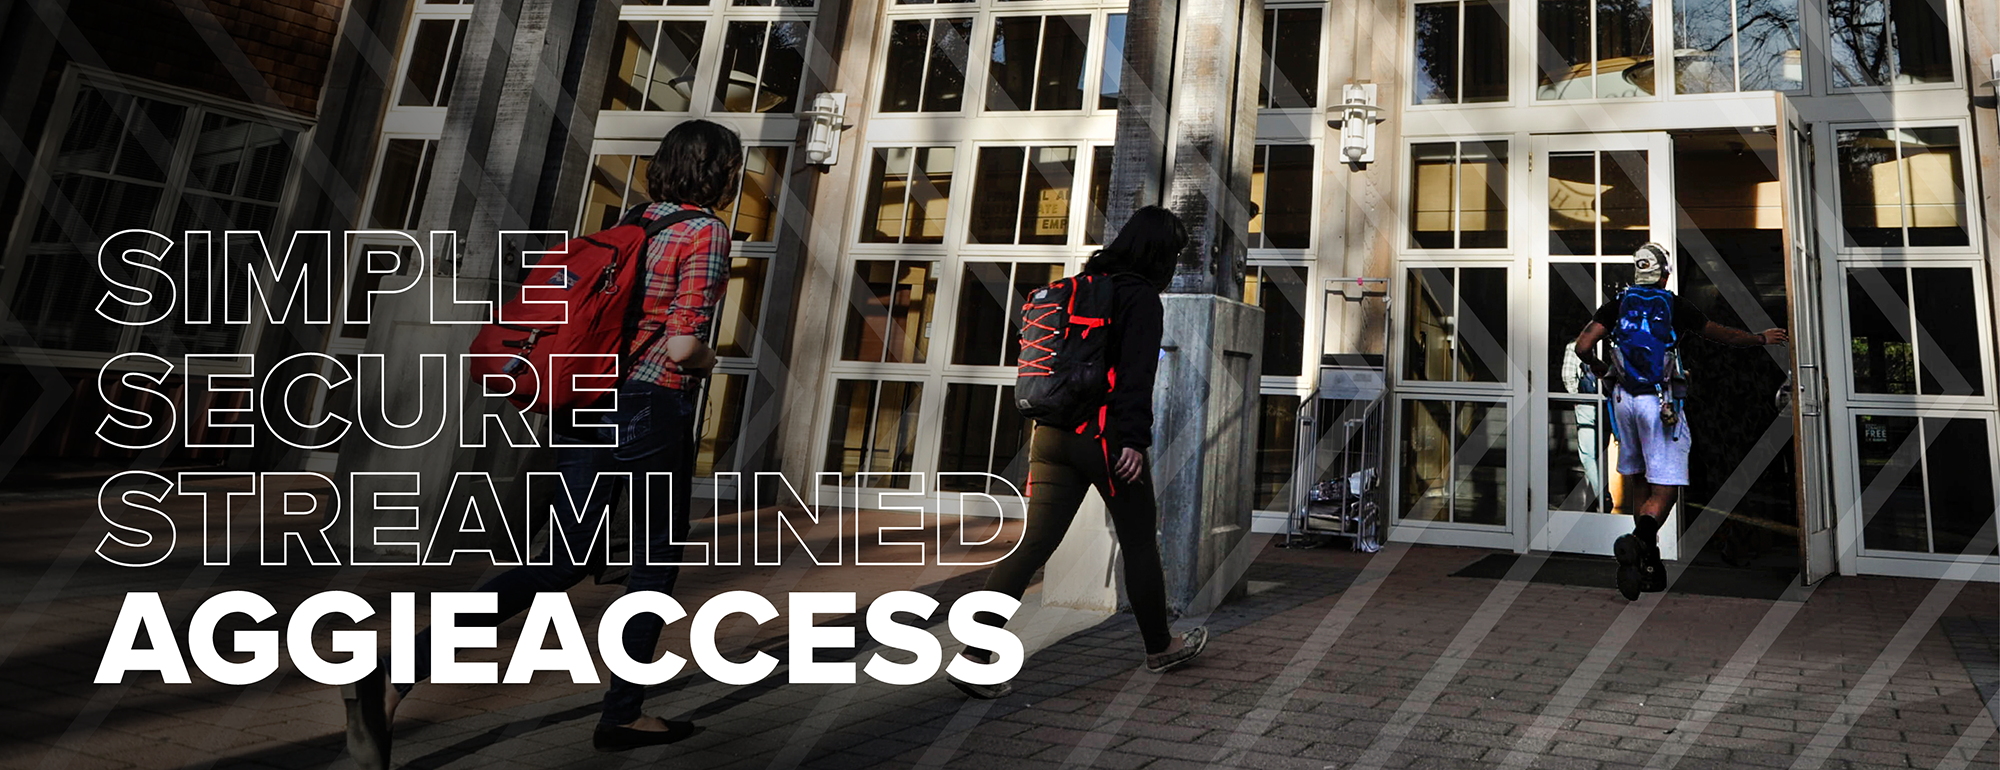 Students walk into building on campus. Text overlay reads "Simple, Secure, Streamlined, AggieAccess."